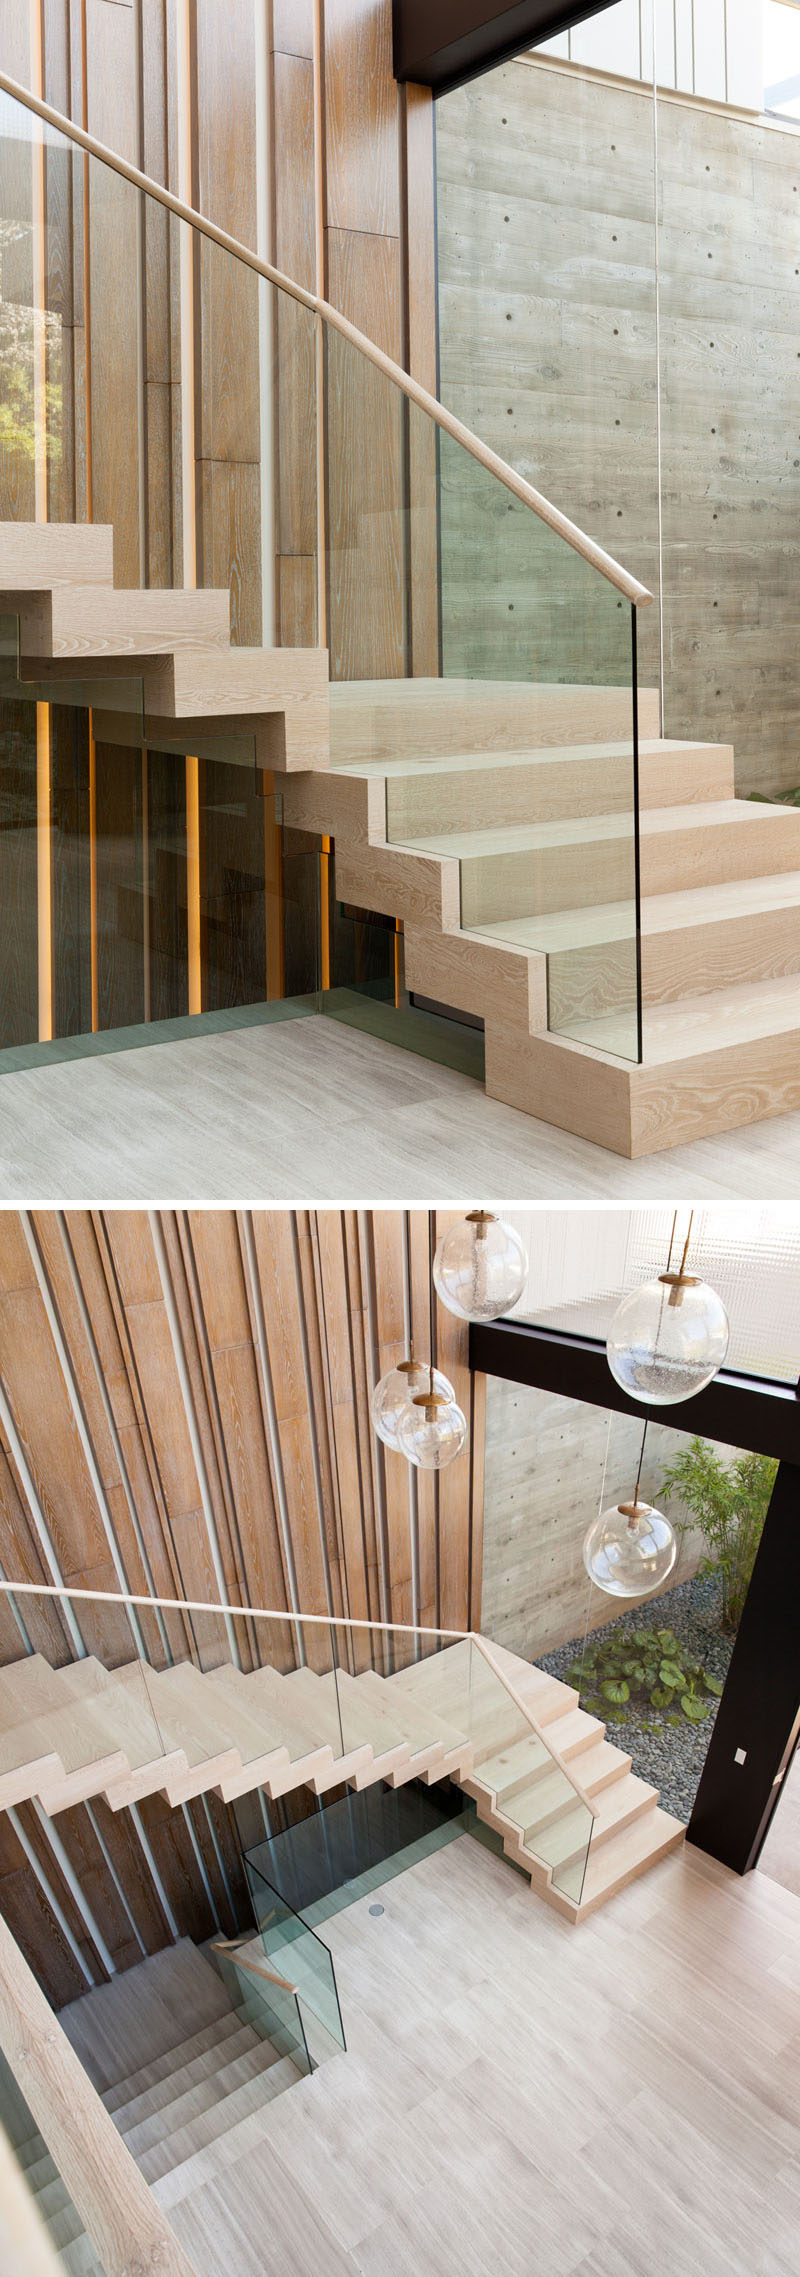 In this modern house, light wood stairs lead up to the second floor of the home., and a vertical wood accent wall with hidden lighting helps to emphasize the height of the foyer.